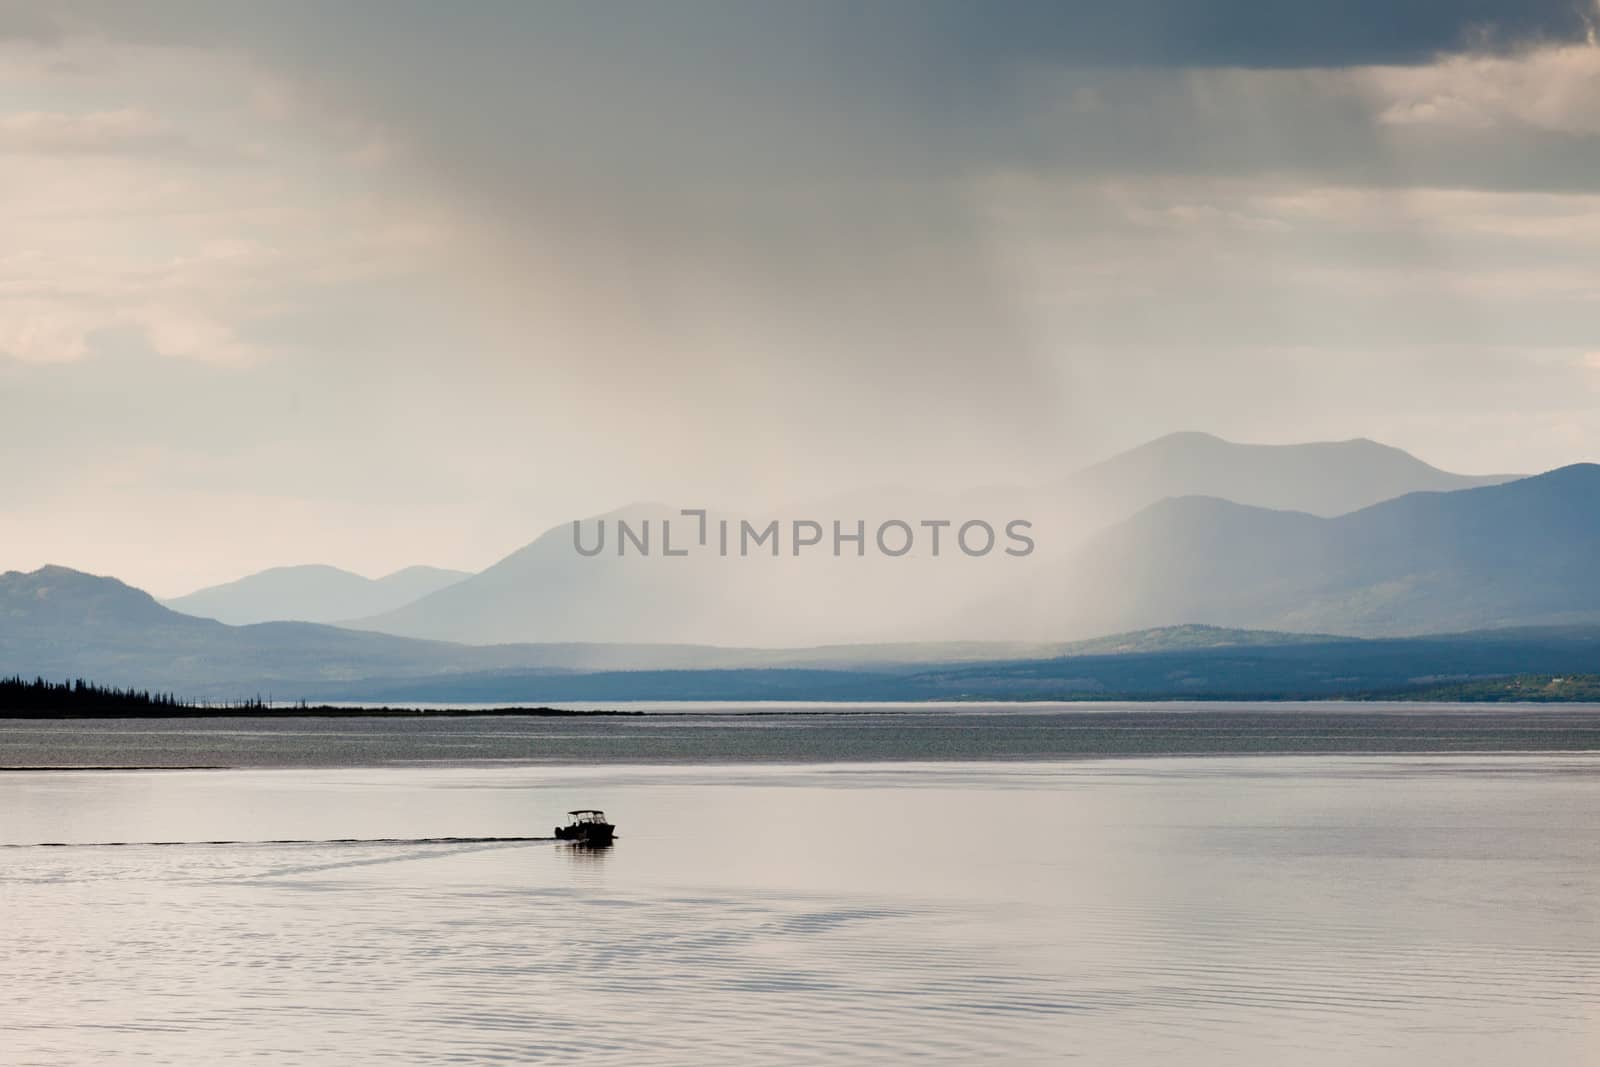 Heavy rain shower over Marsh Lake Yukon Territory Canada and distant mountain range with a small motorboat out on tranquil water